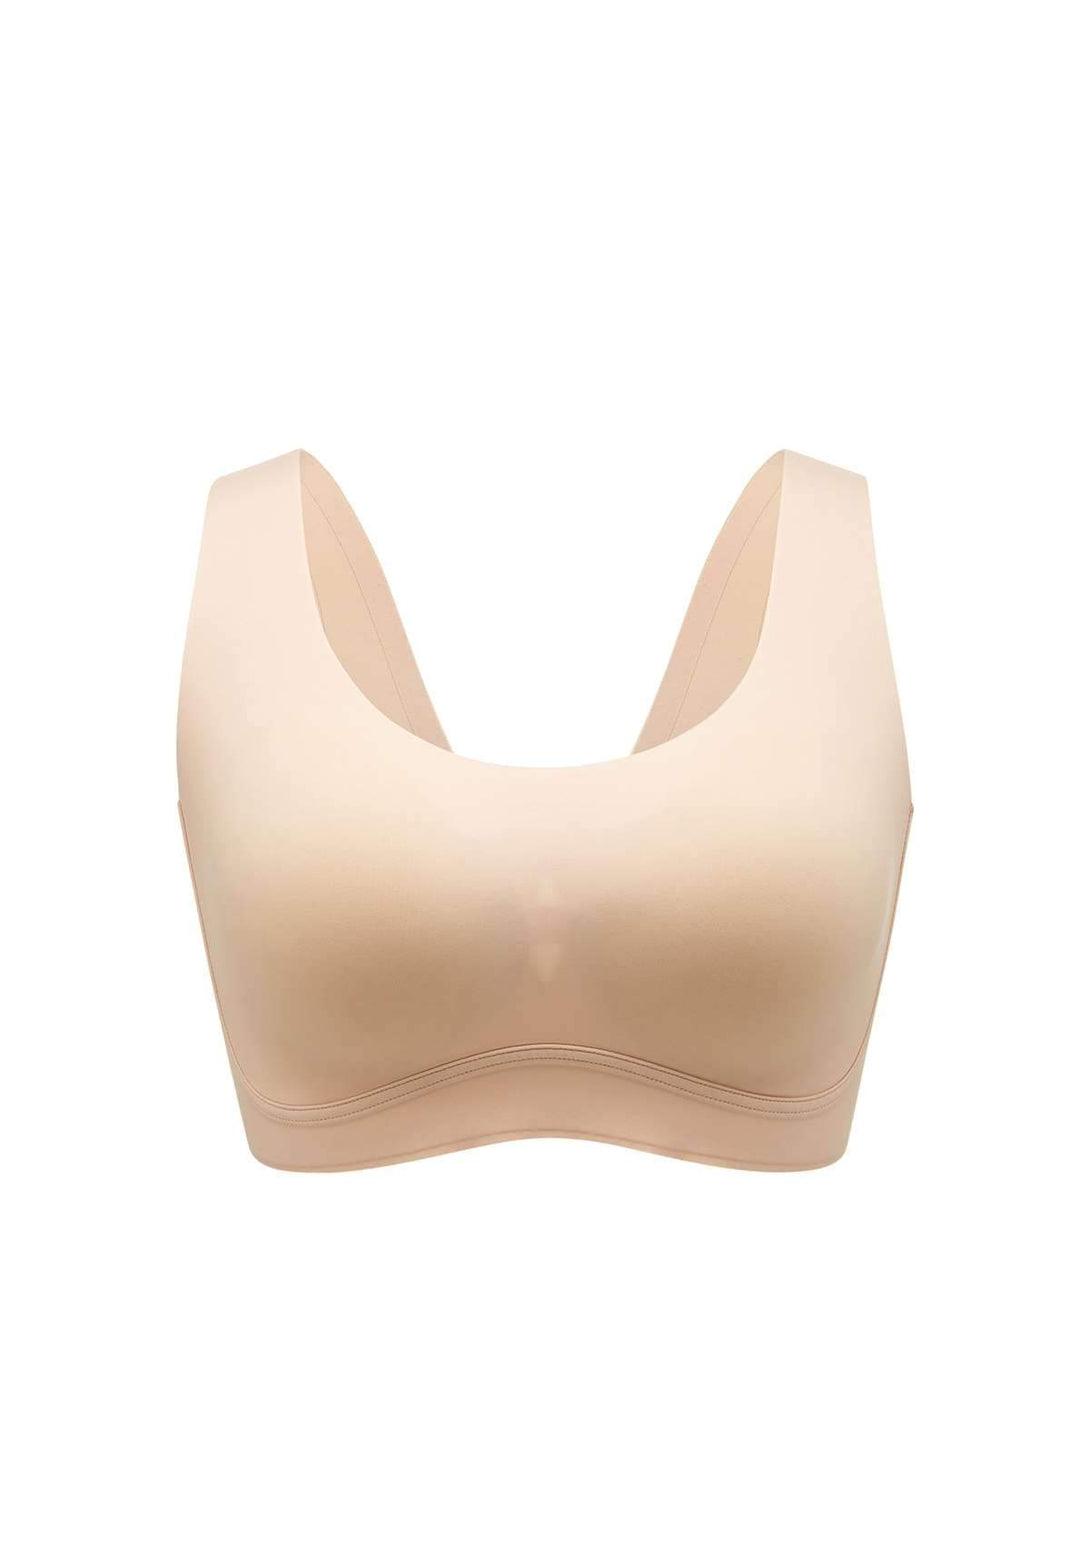  XELETU Breathable Cool Lift Up Air Bra,Seamless Wireless  Cooling Comfort Breathable Bra with Removable Pads(Beige,Medium) :  Clothing, Shoes & Jewelry